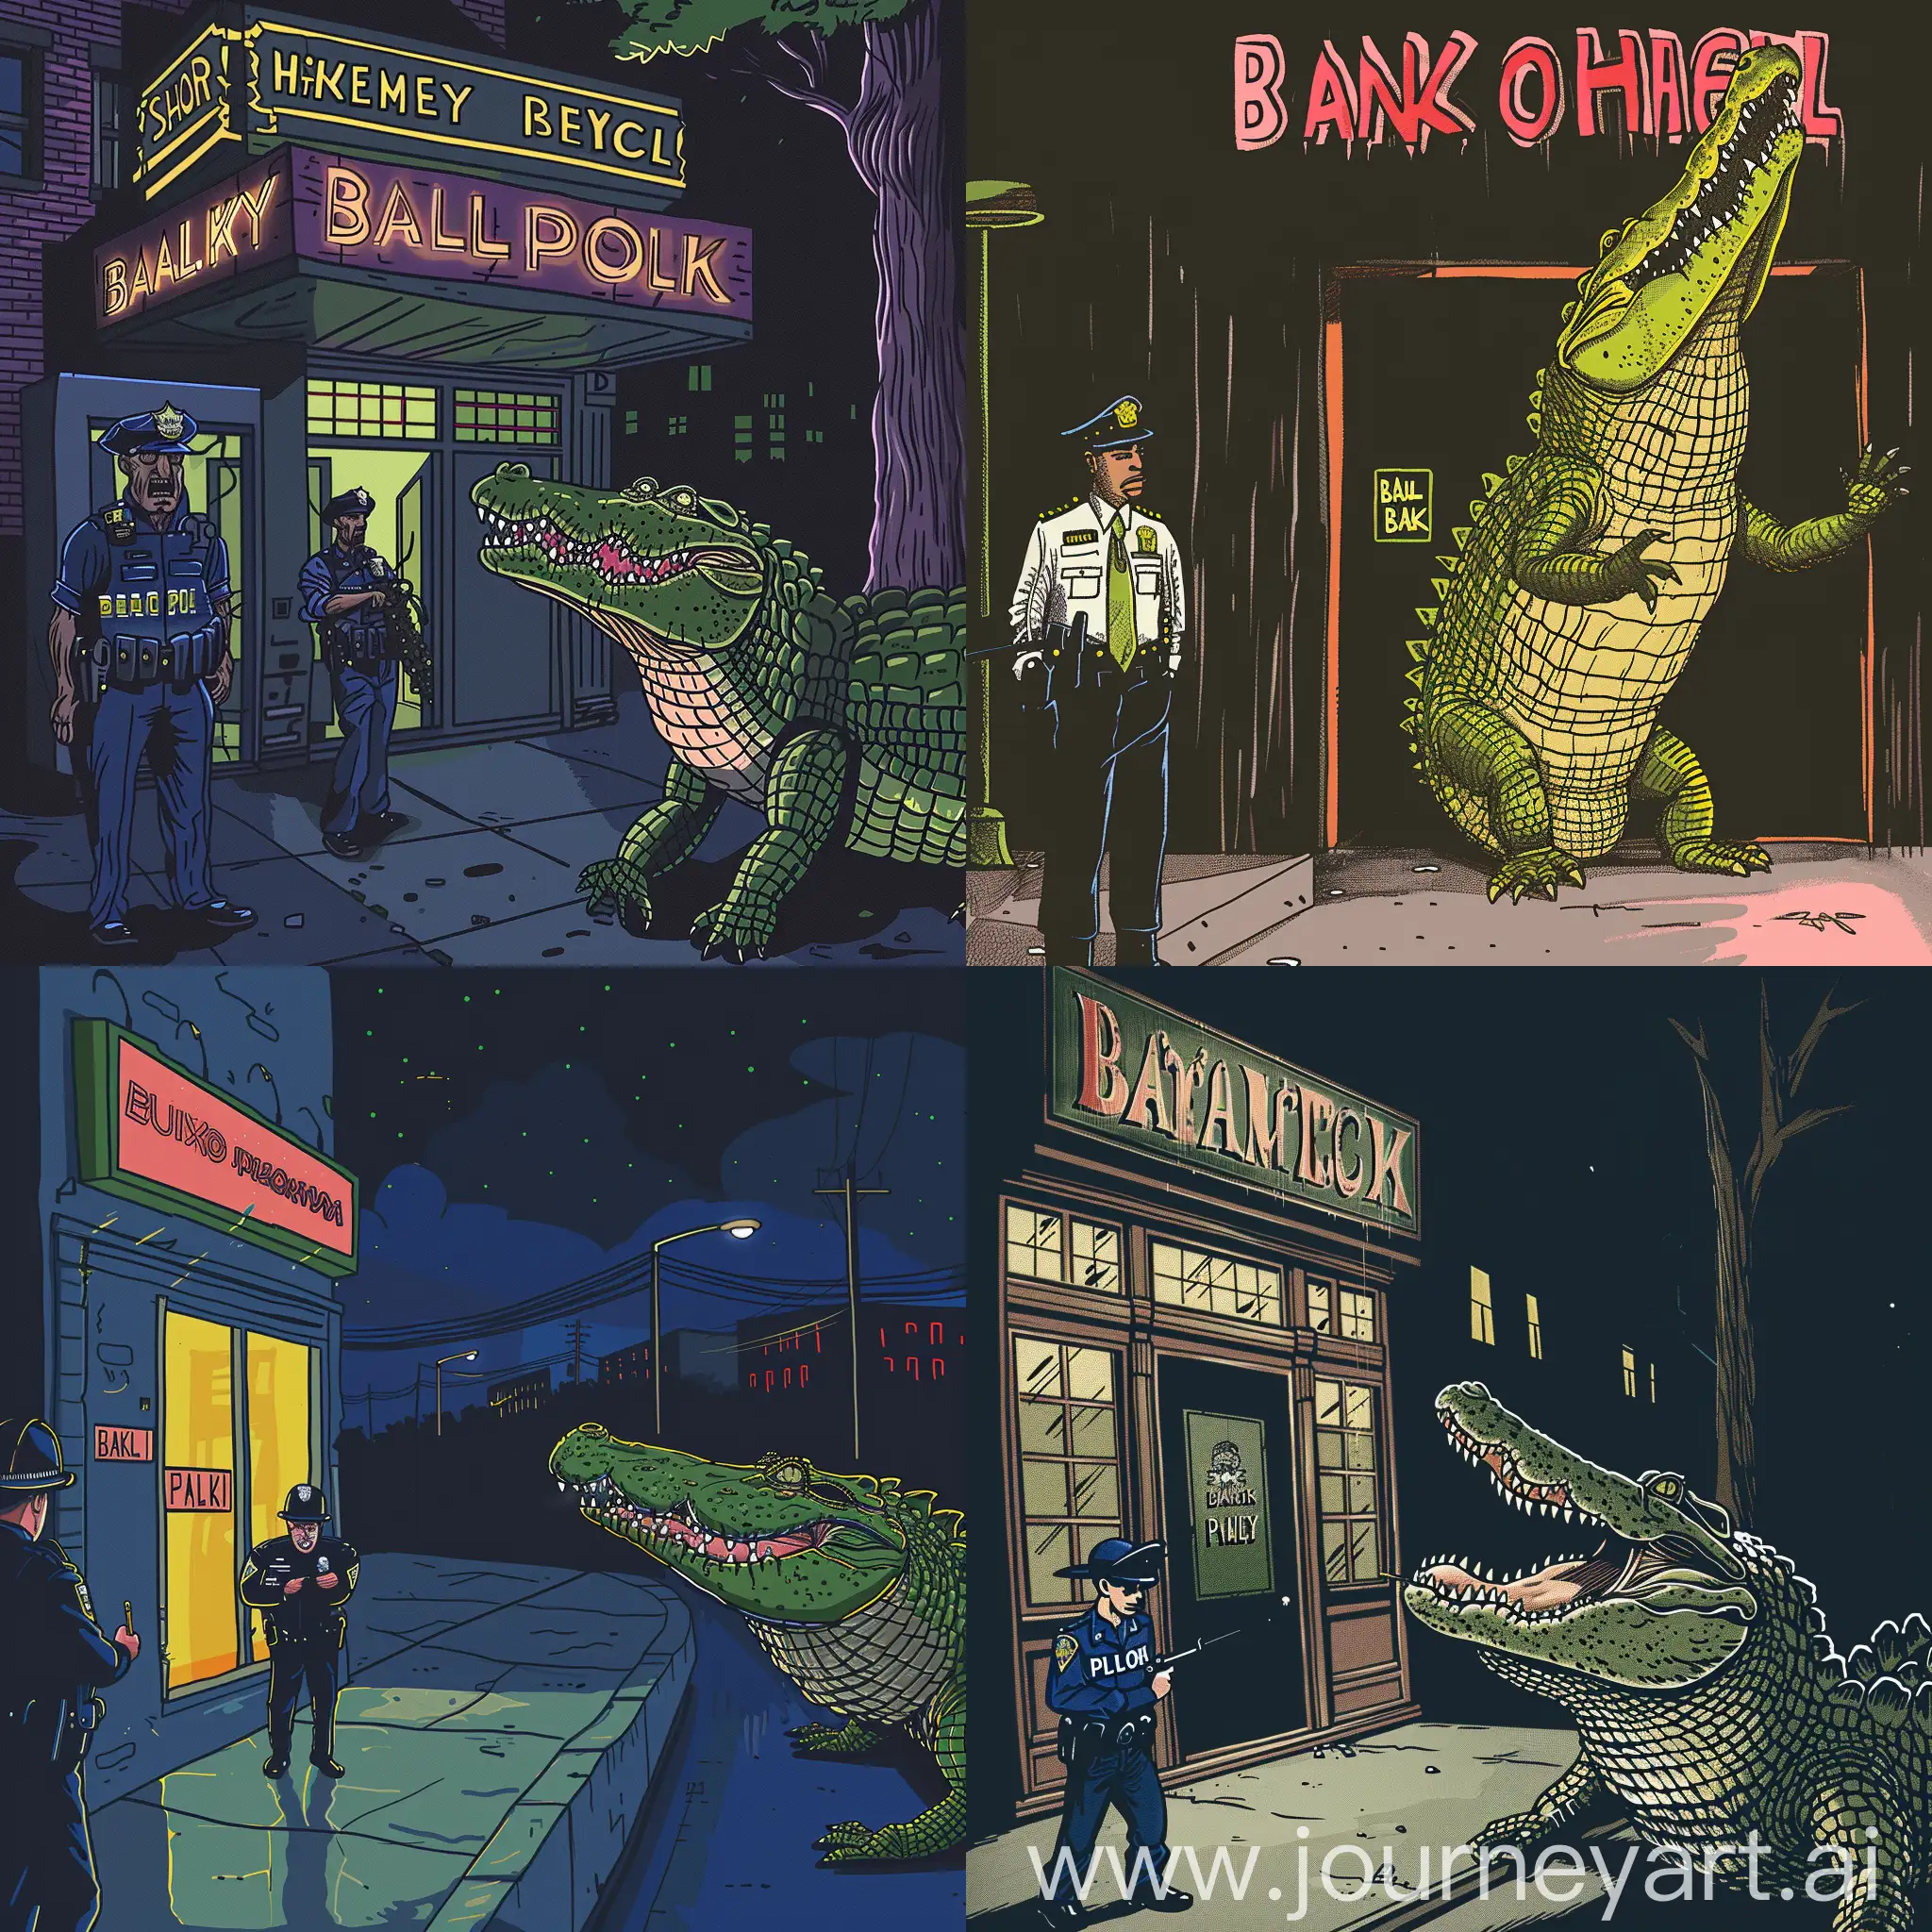 An american crocodile robbing a bank. Police have showed up and is very confused. It is night time in the inner city. Drawn in a simplistic style